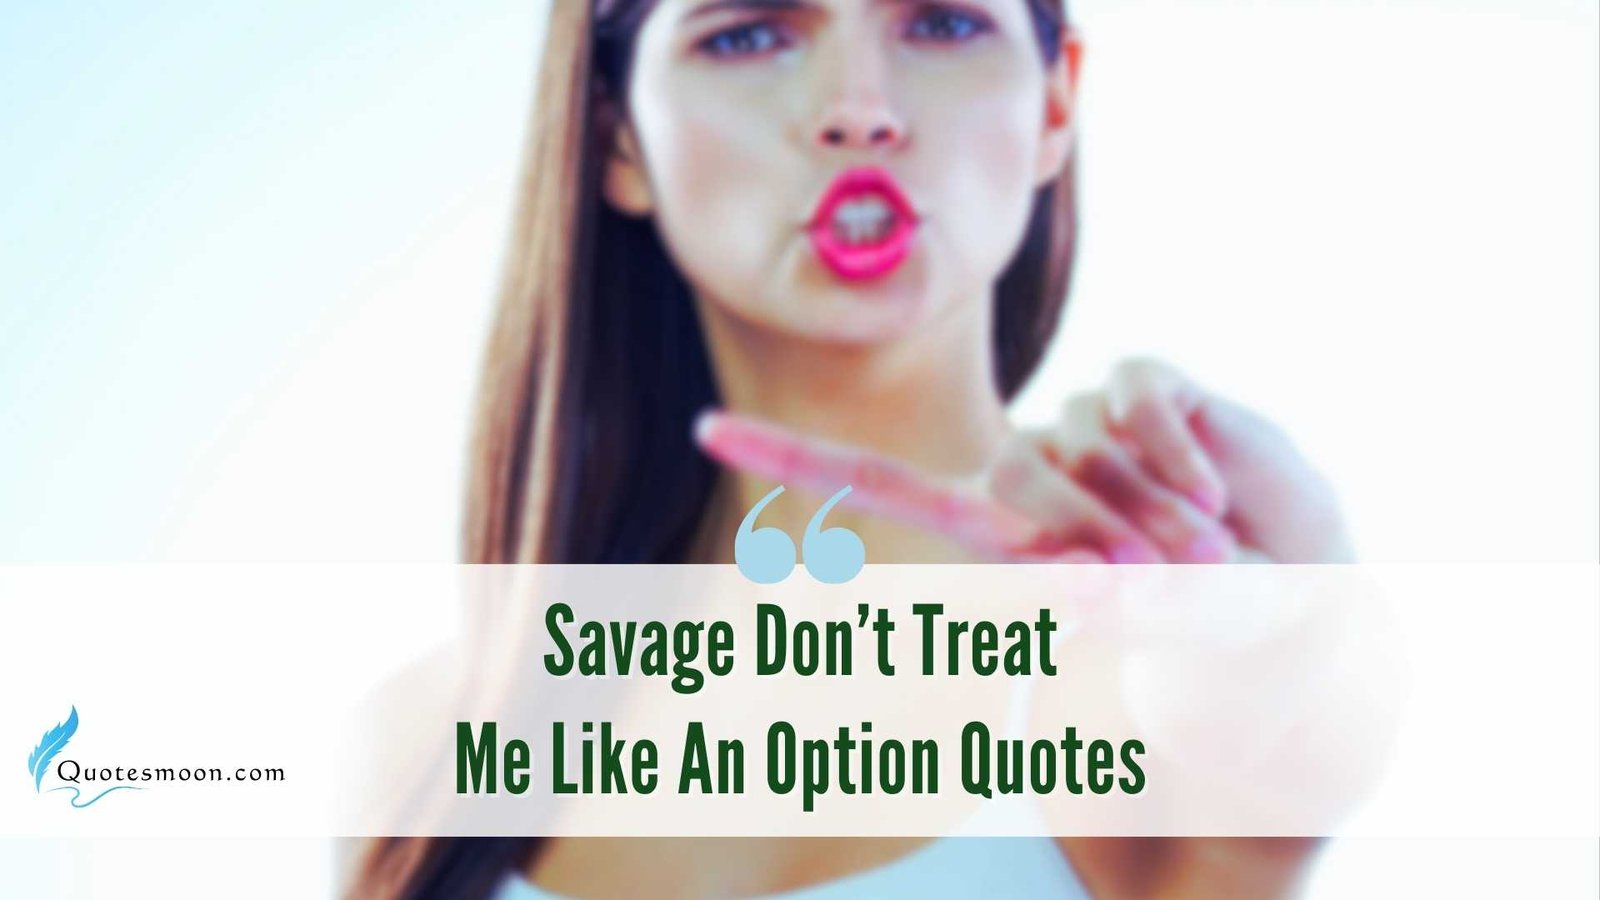 Savage Don't Treat Me Like An Option Quotes